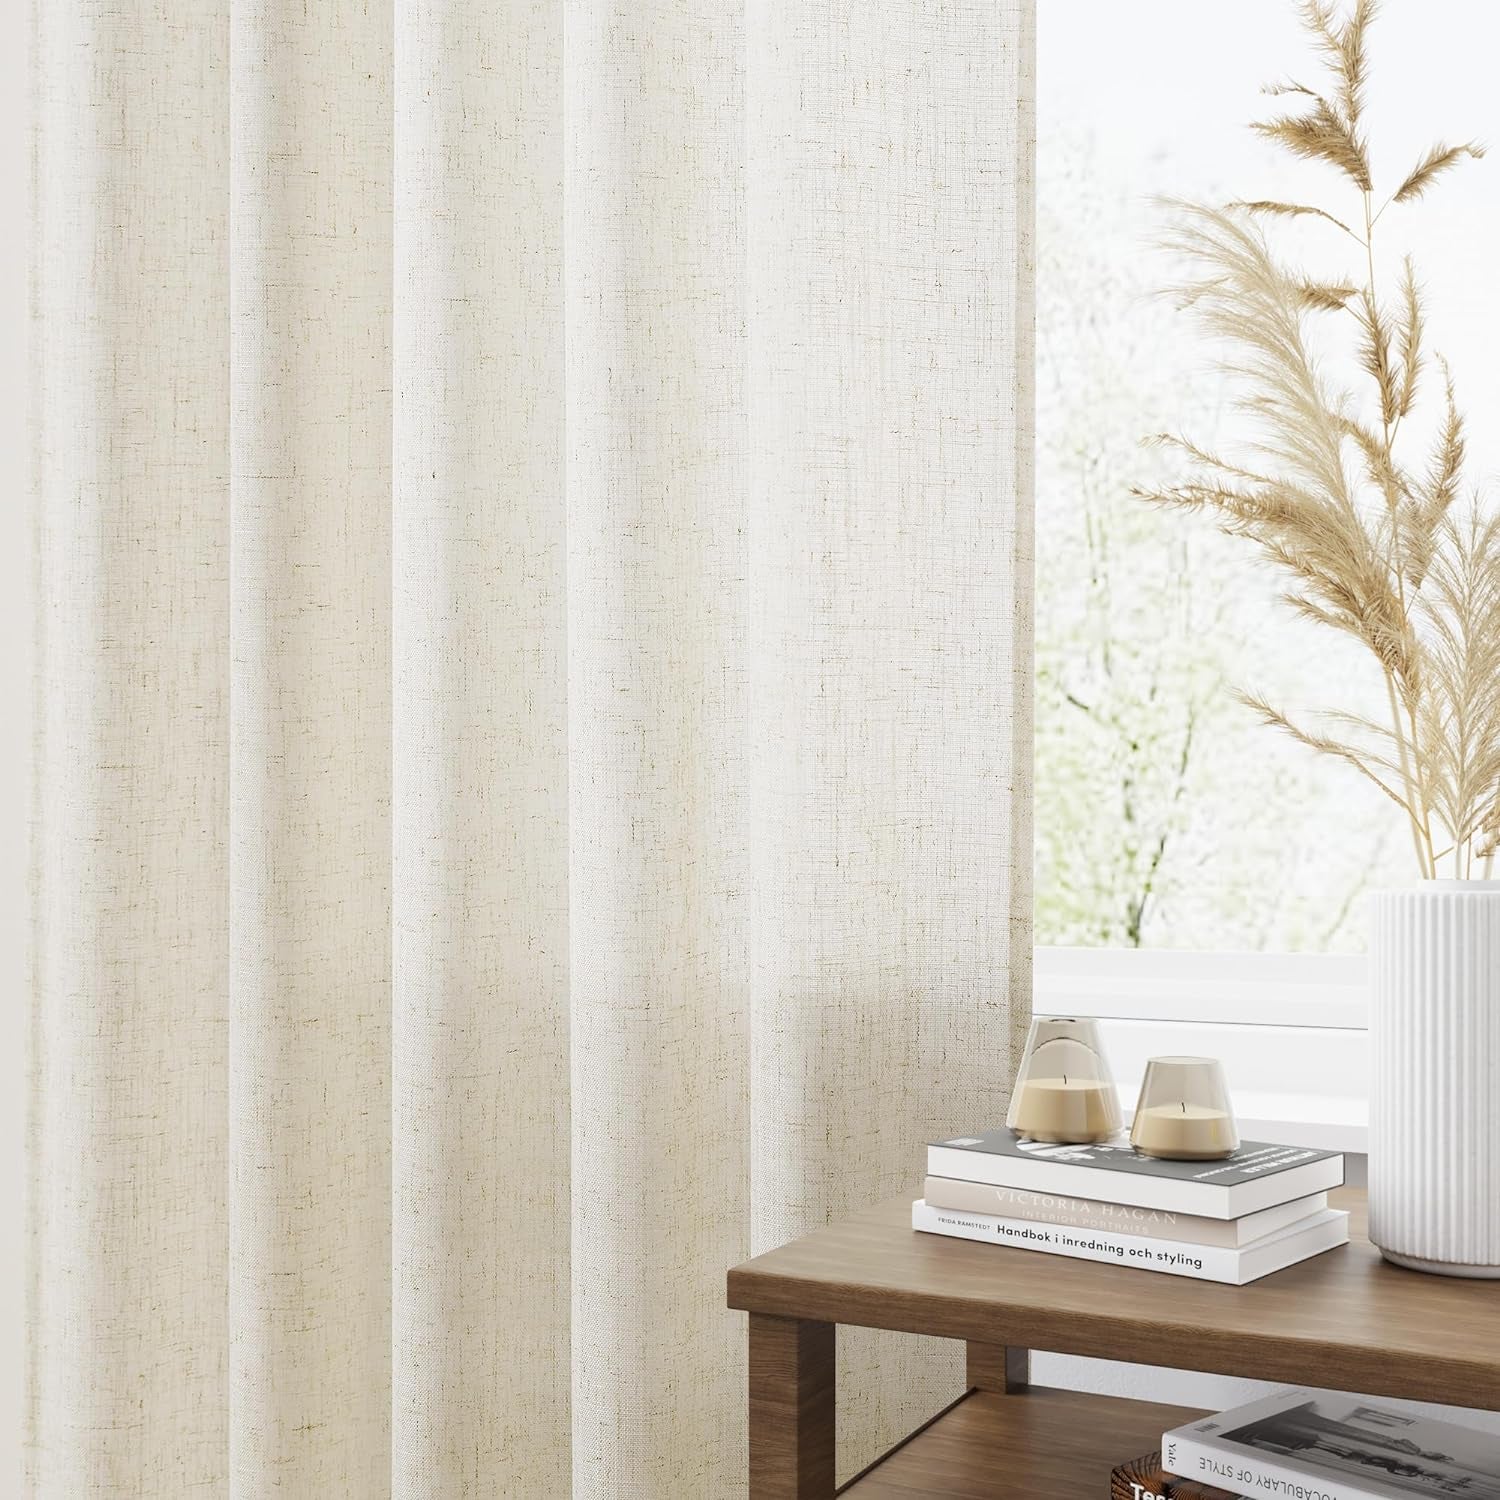 Natural Linen Sheer Curtains 84 Inch Long for Living Room Bedroom Back Tab Light Filtering Privacy Farmhouse Rod Pocket Ivory off White Neutral Drapes with Hooks 2 Panels Cream Beige  SPWIY   